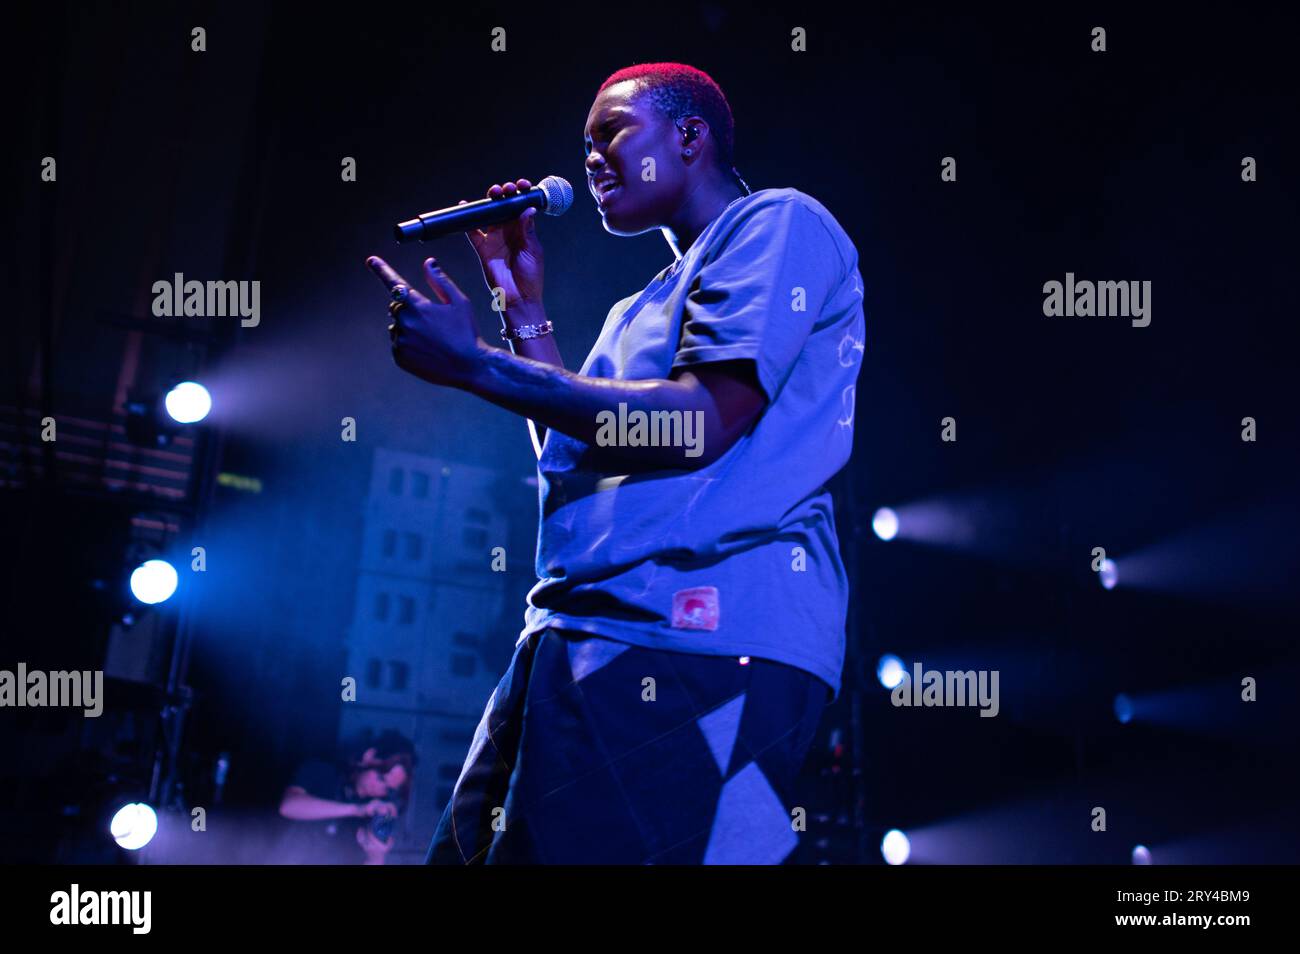 Hammersmith, London, 28/09/2023, Singer Arlo Parks performing at Eventim Apollo, Hammersmith, London during the “My Soft Machine” tour. Credit: John Barry/Alamy Live News Stock Photo